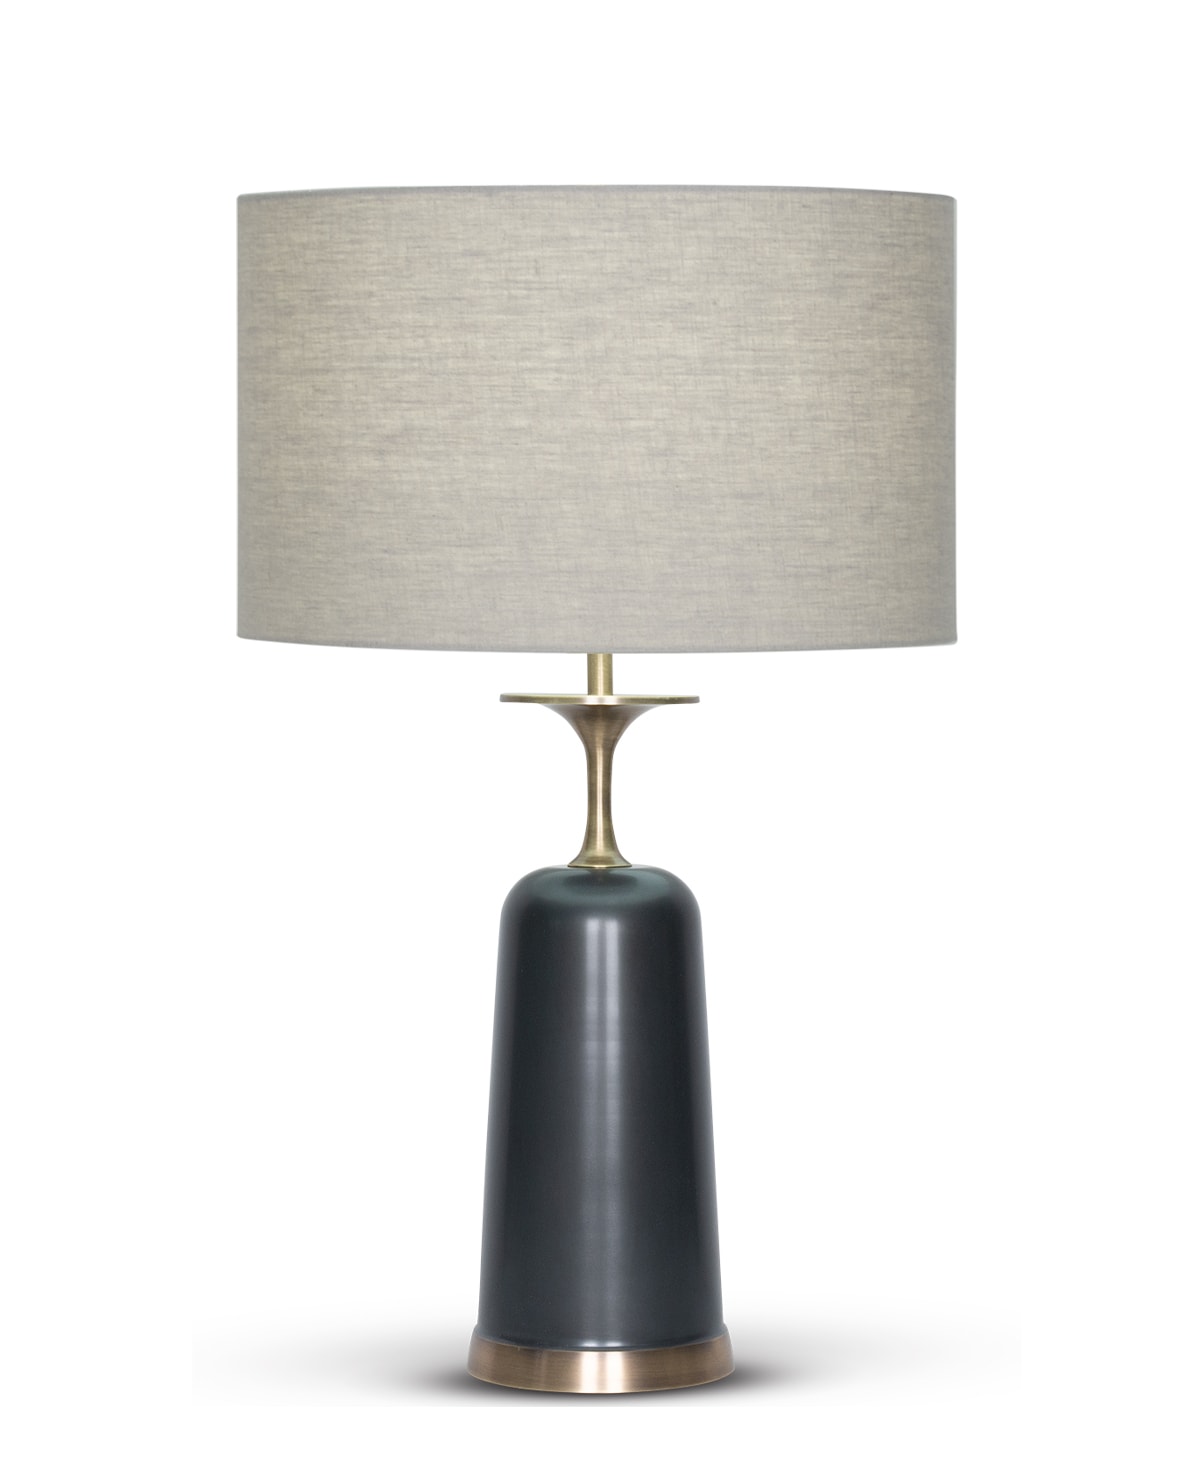 FlowDecor Fletcher Table Lamp in metal with antique brass & gunmetal finishes and beige linen drum shade (# 4552)